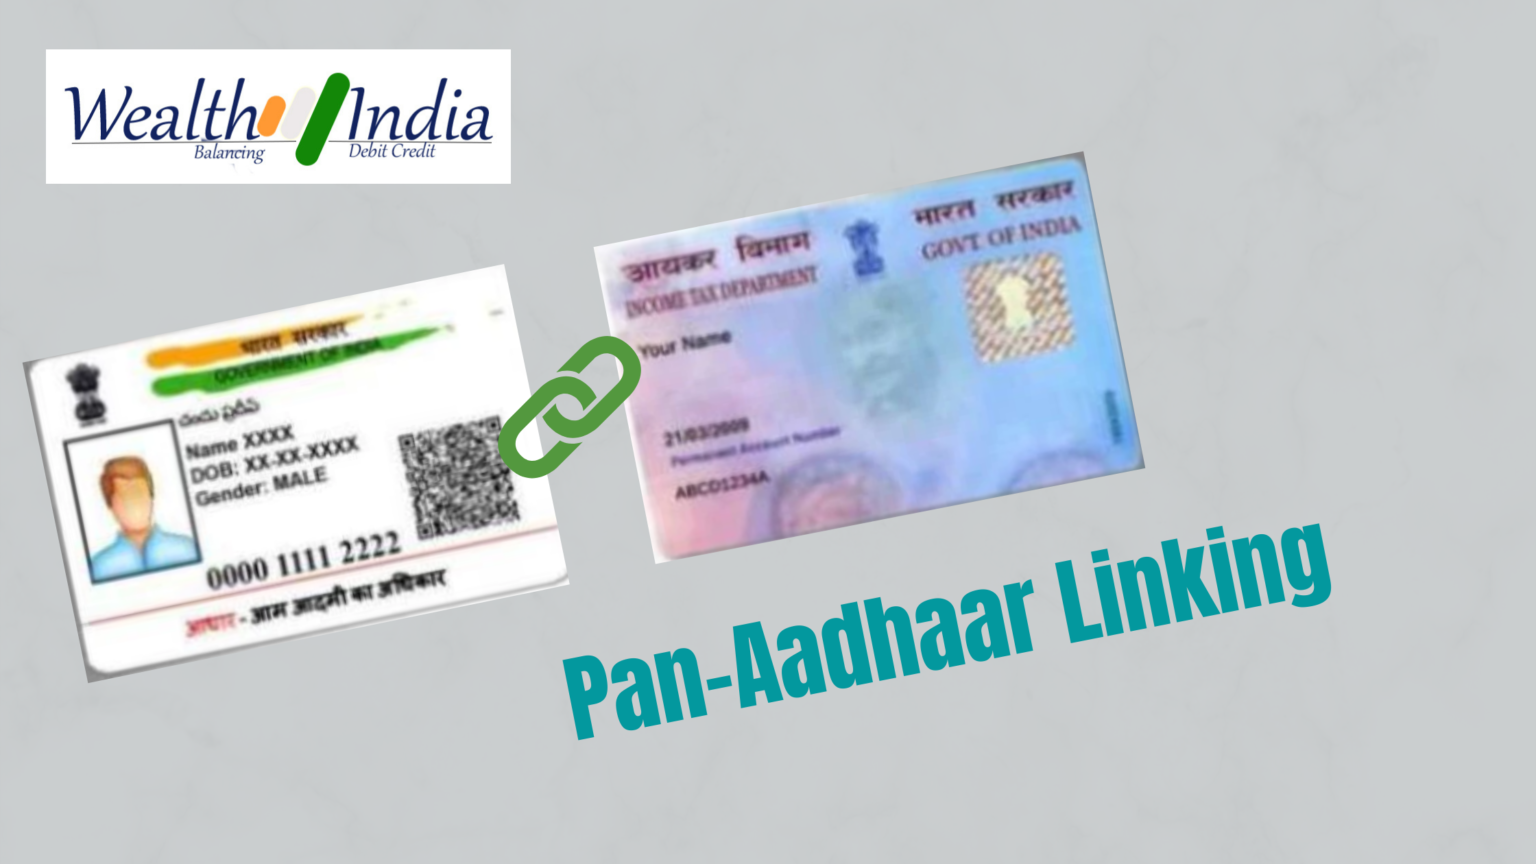 How to link pan cards with Aadhaar cards?